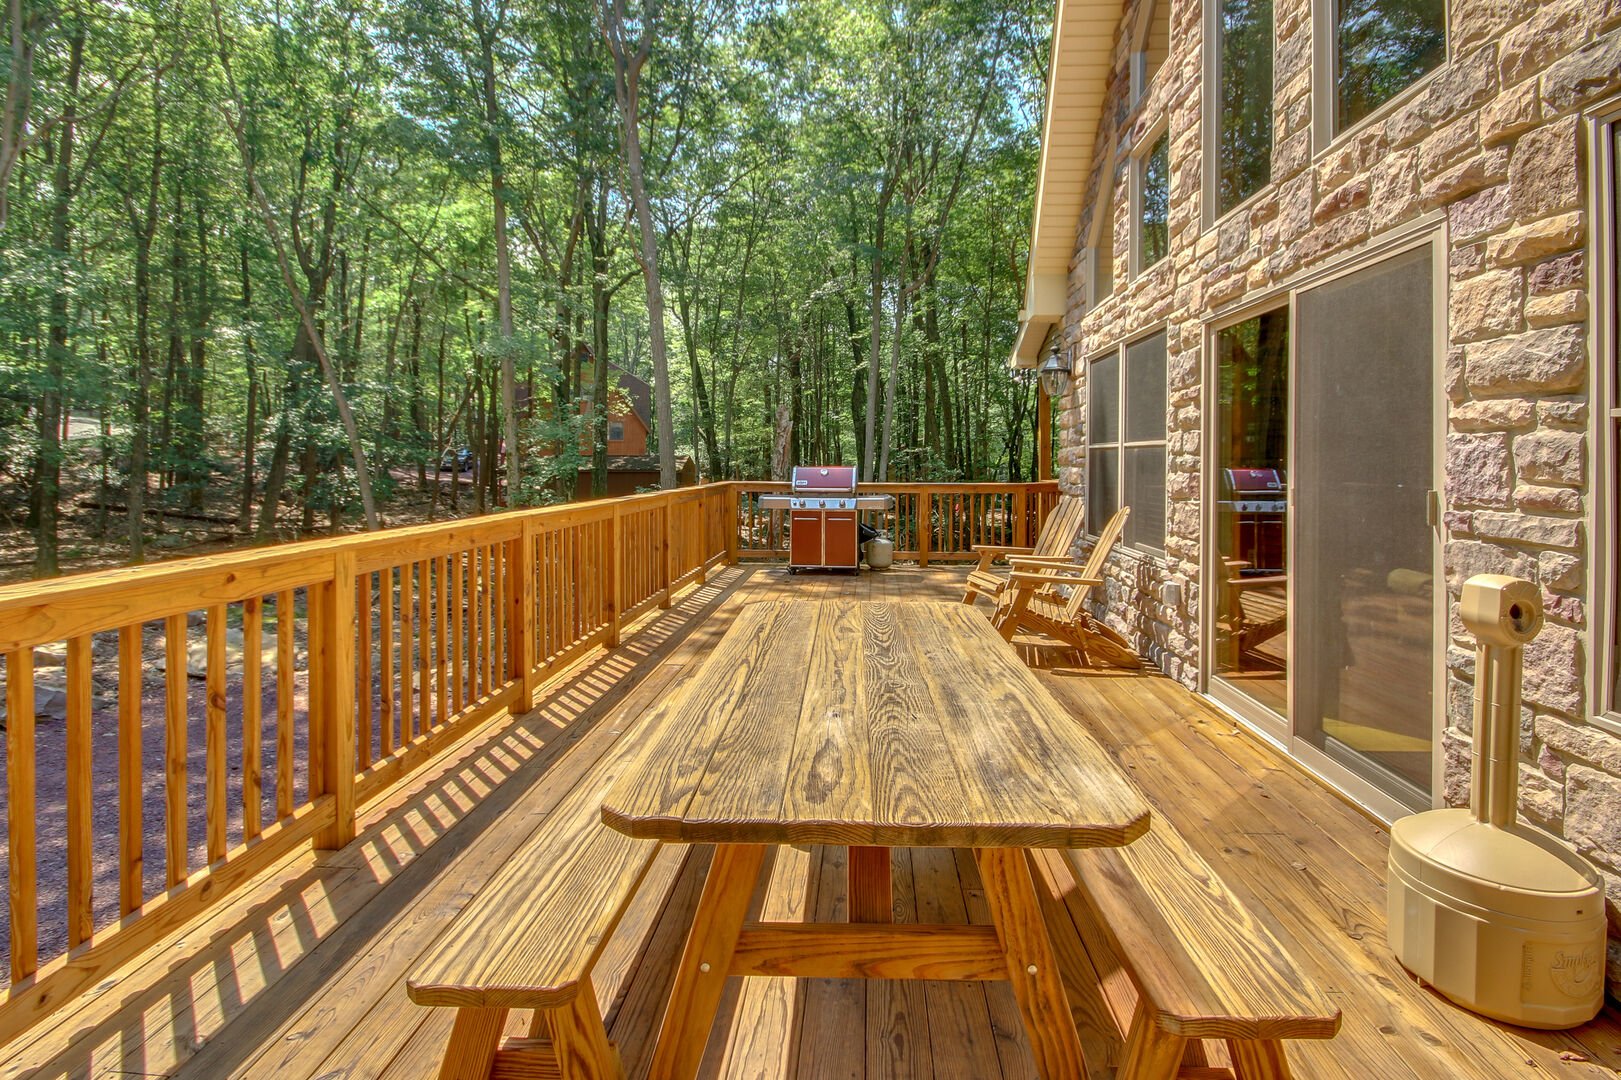 Picnic table and grill on the porch of this luxurious Poconos vacation rental.